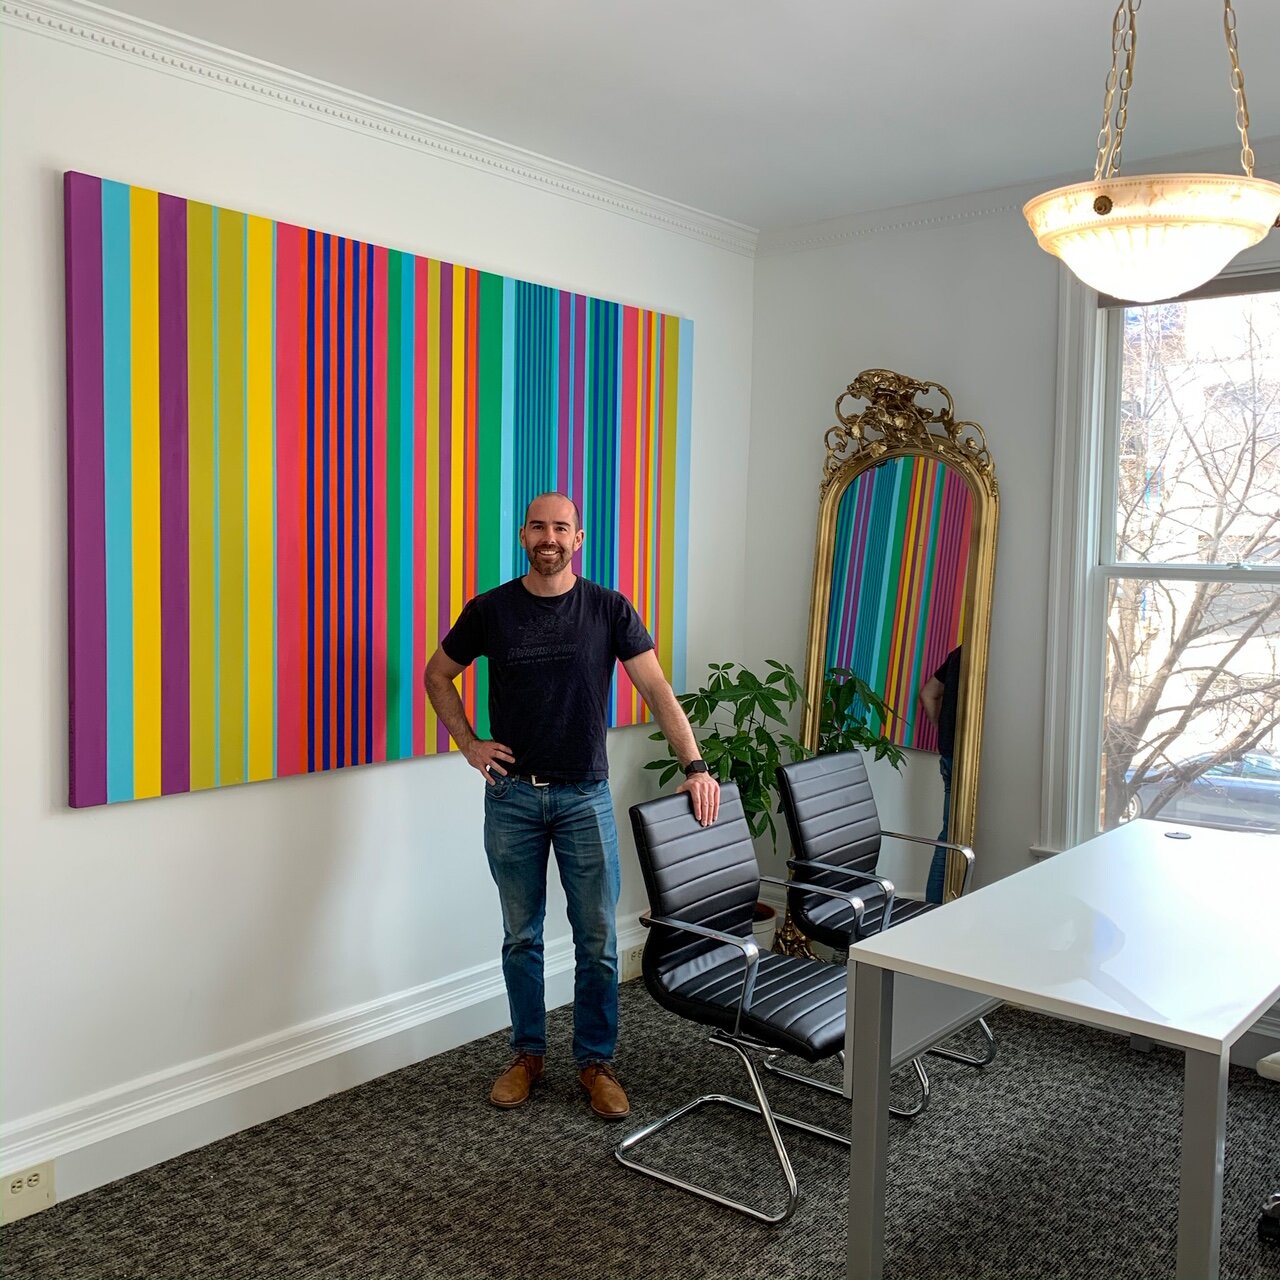 Own Ben Stern in front of Sue's artwork Buyer's Edge Dupont DC buyers agent real estate office.JPG